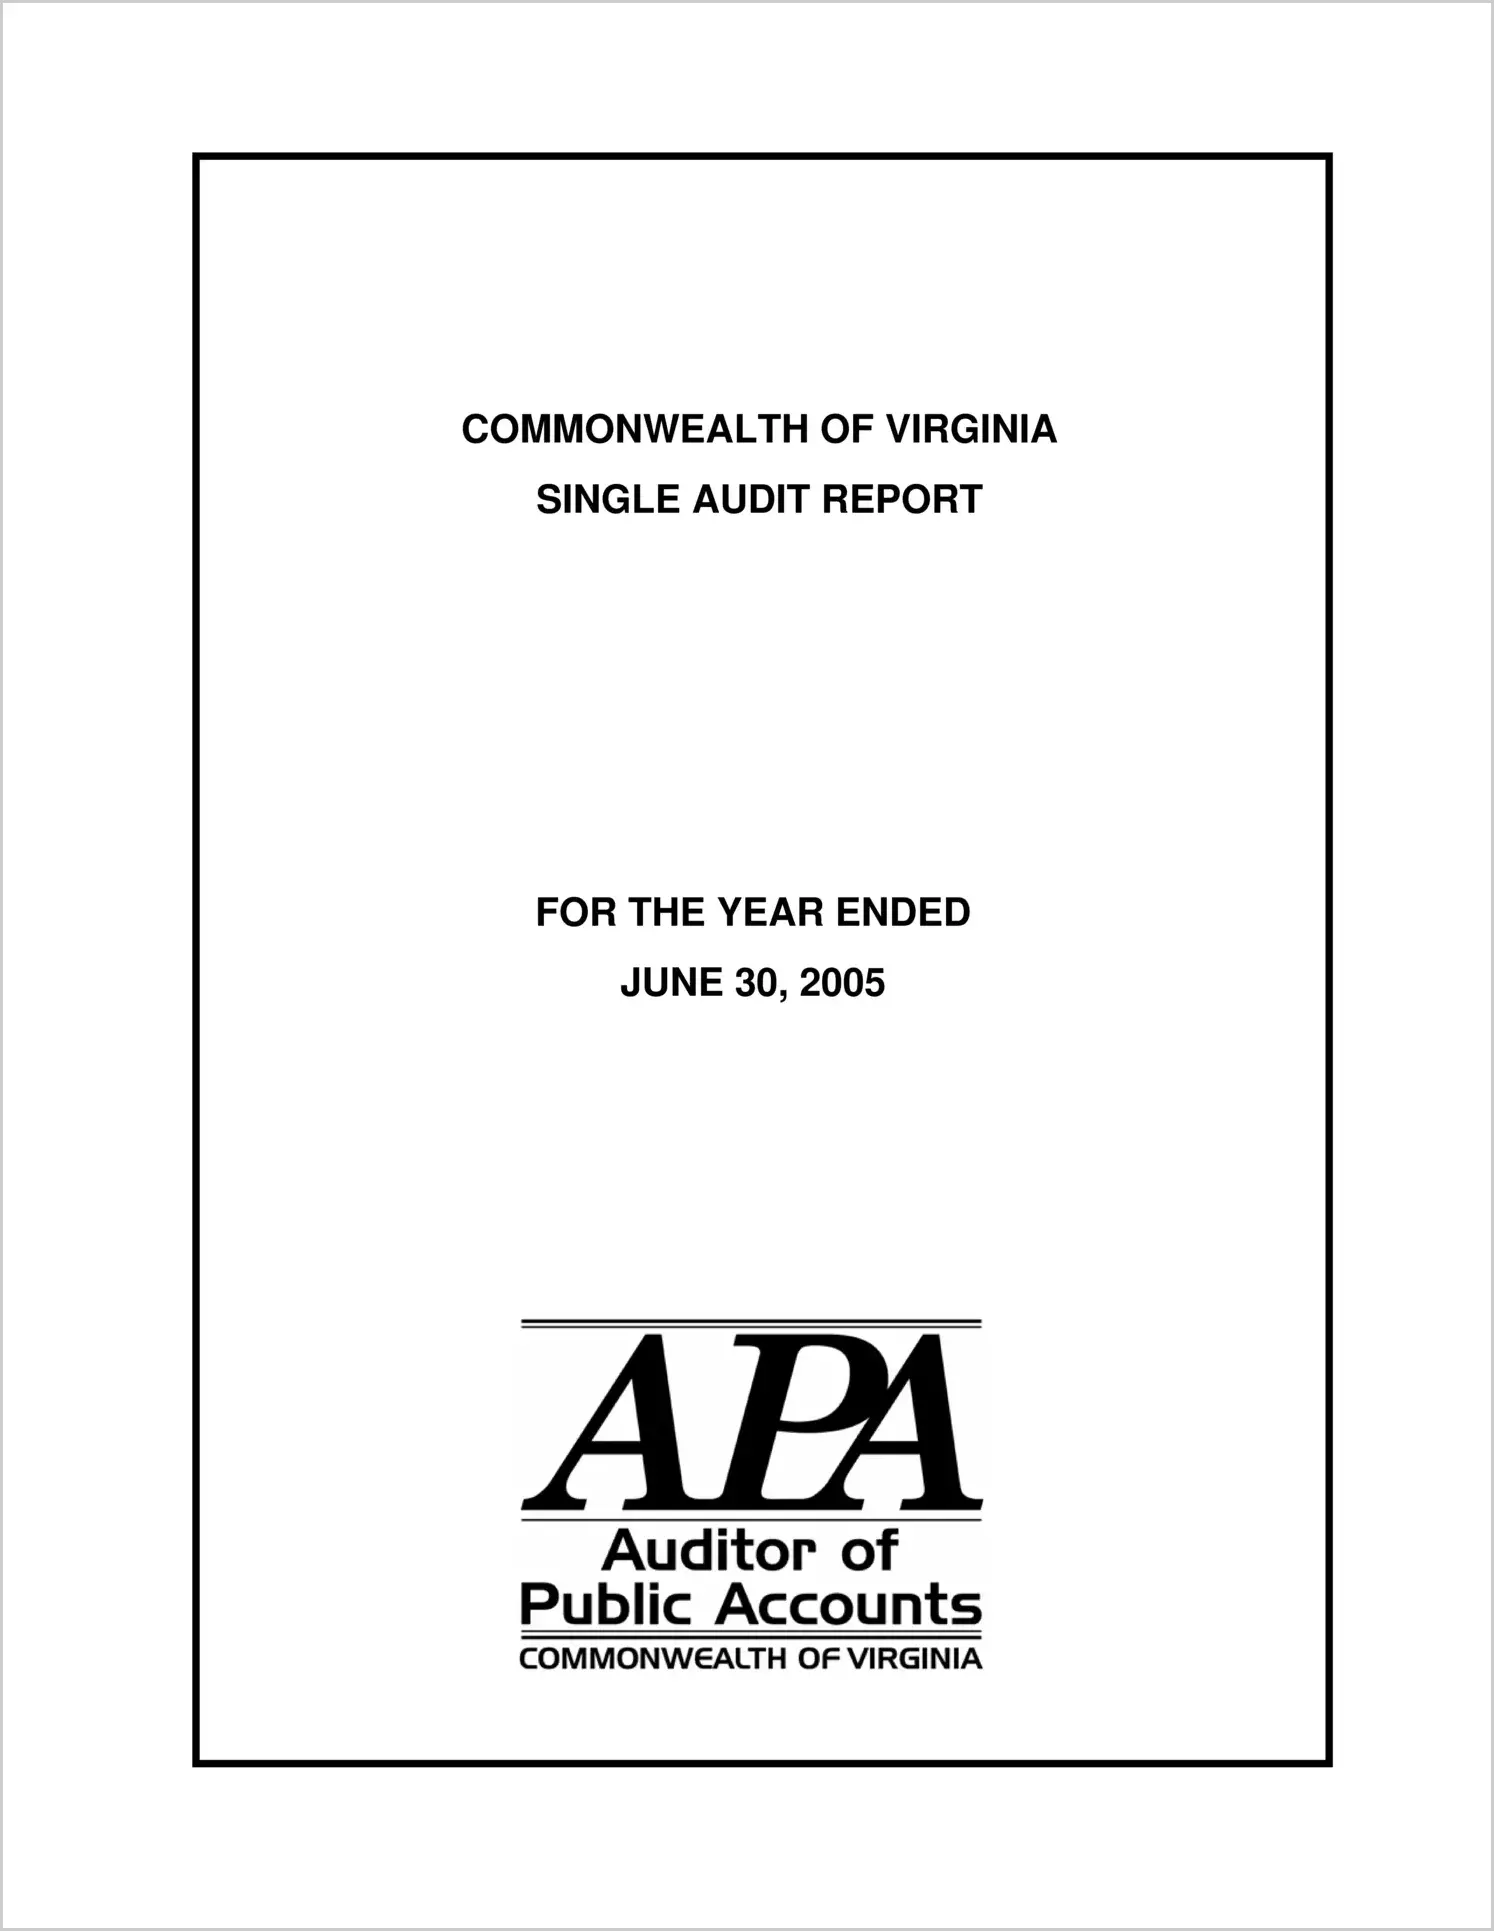 Commonwealth of Virginia Single Audit Report for the Year ended June 30, 2005